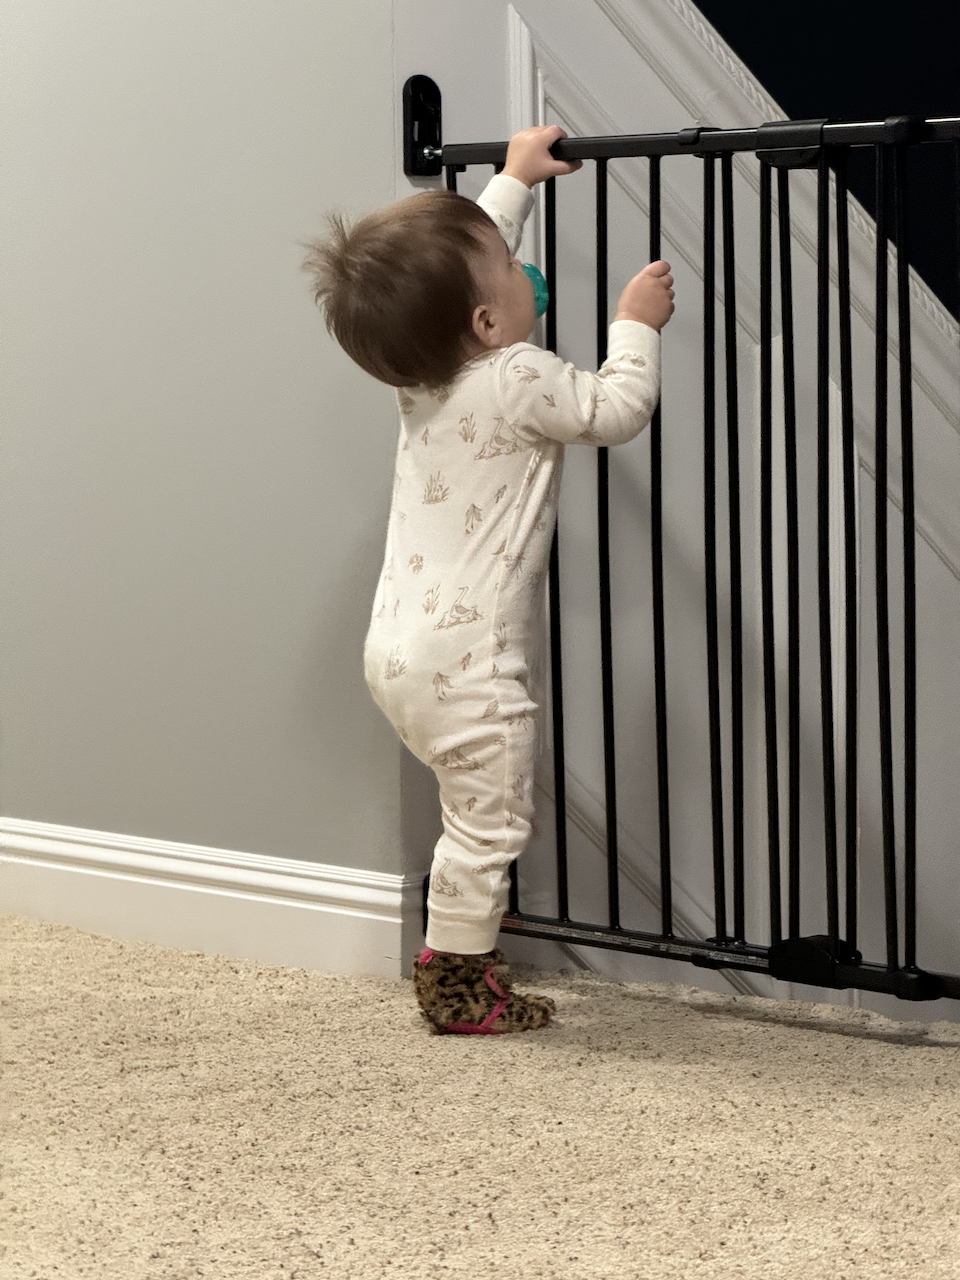 Zoe trying to climb the baby gate.